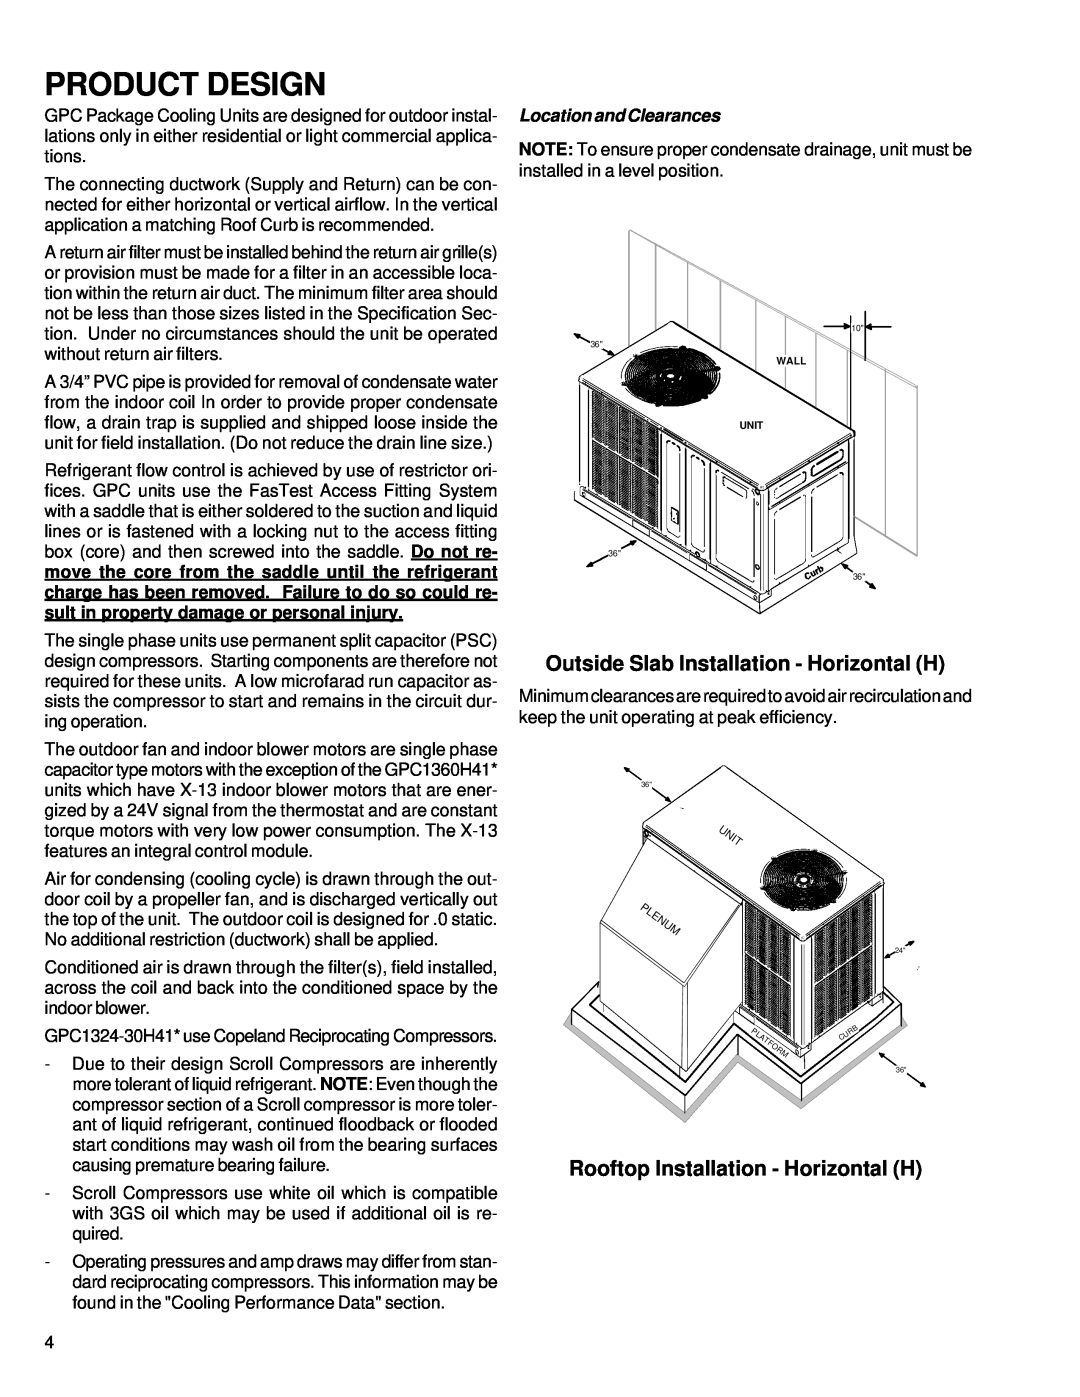 Goodmans GPC 13 SEER R-410A Product Design, Outside Slab Installation - Horizontal H, Rooftop Installation - Horizontal H 